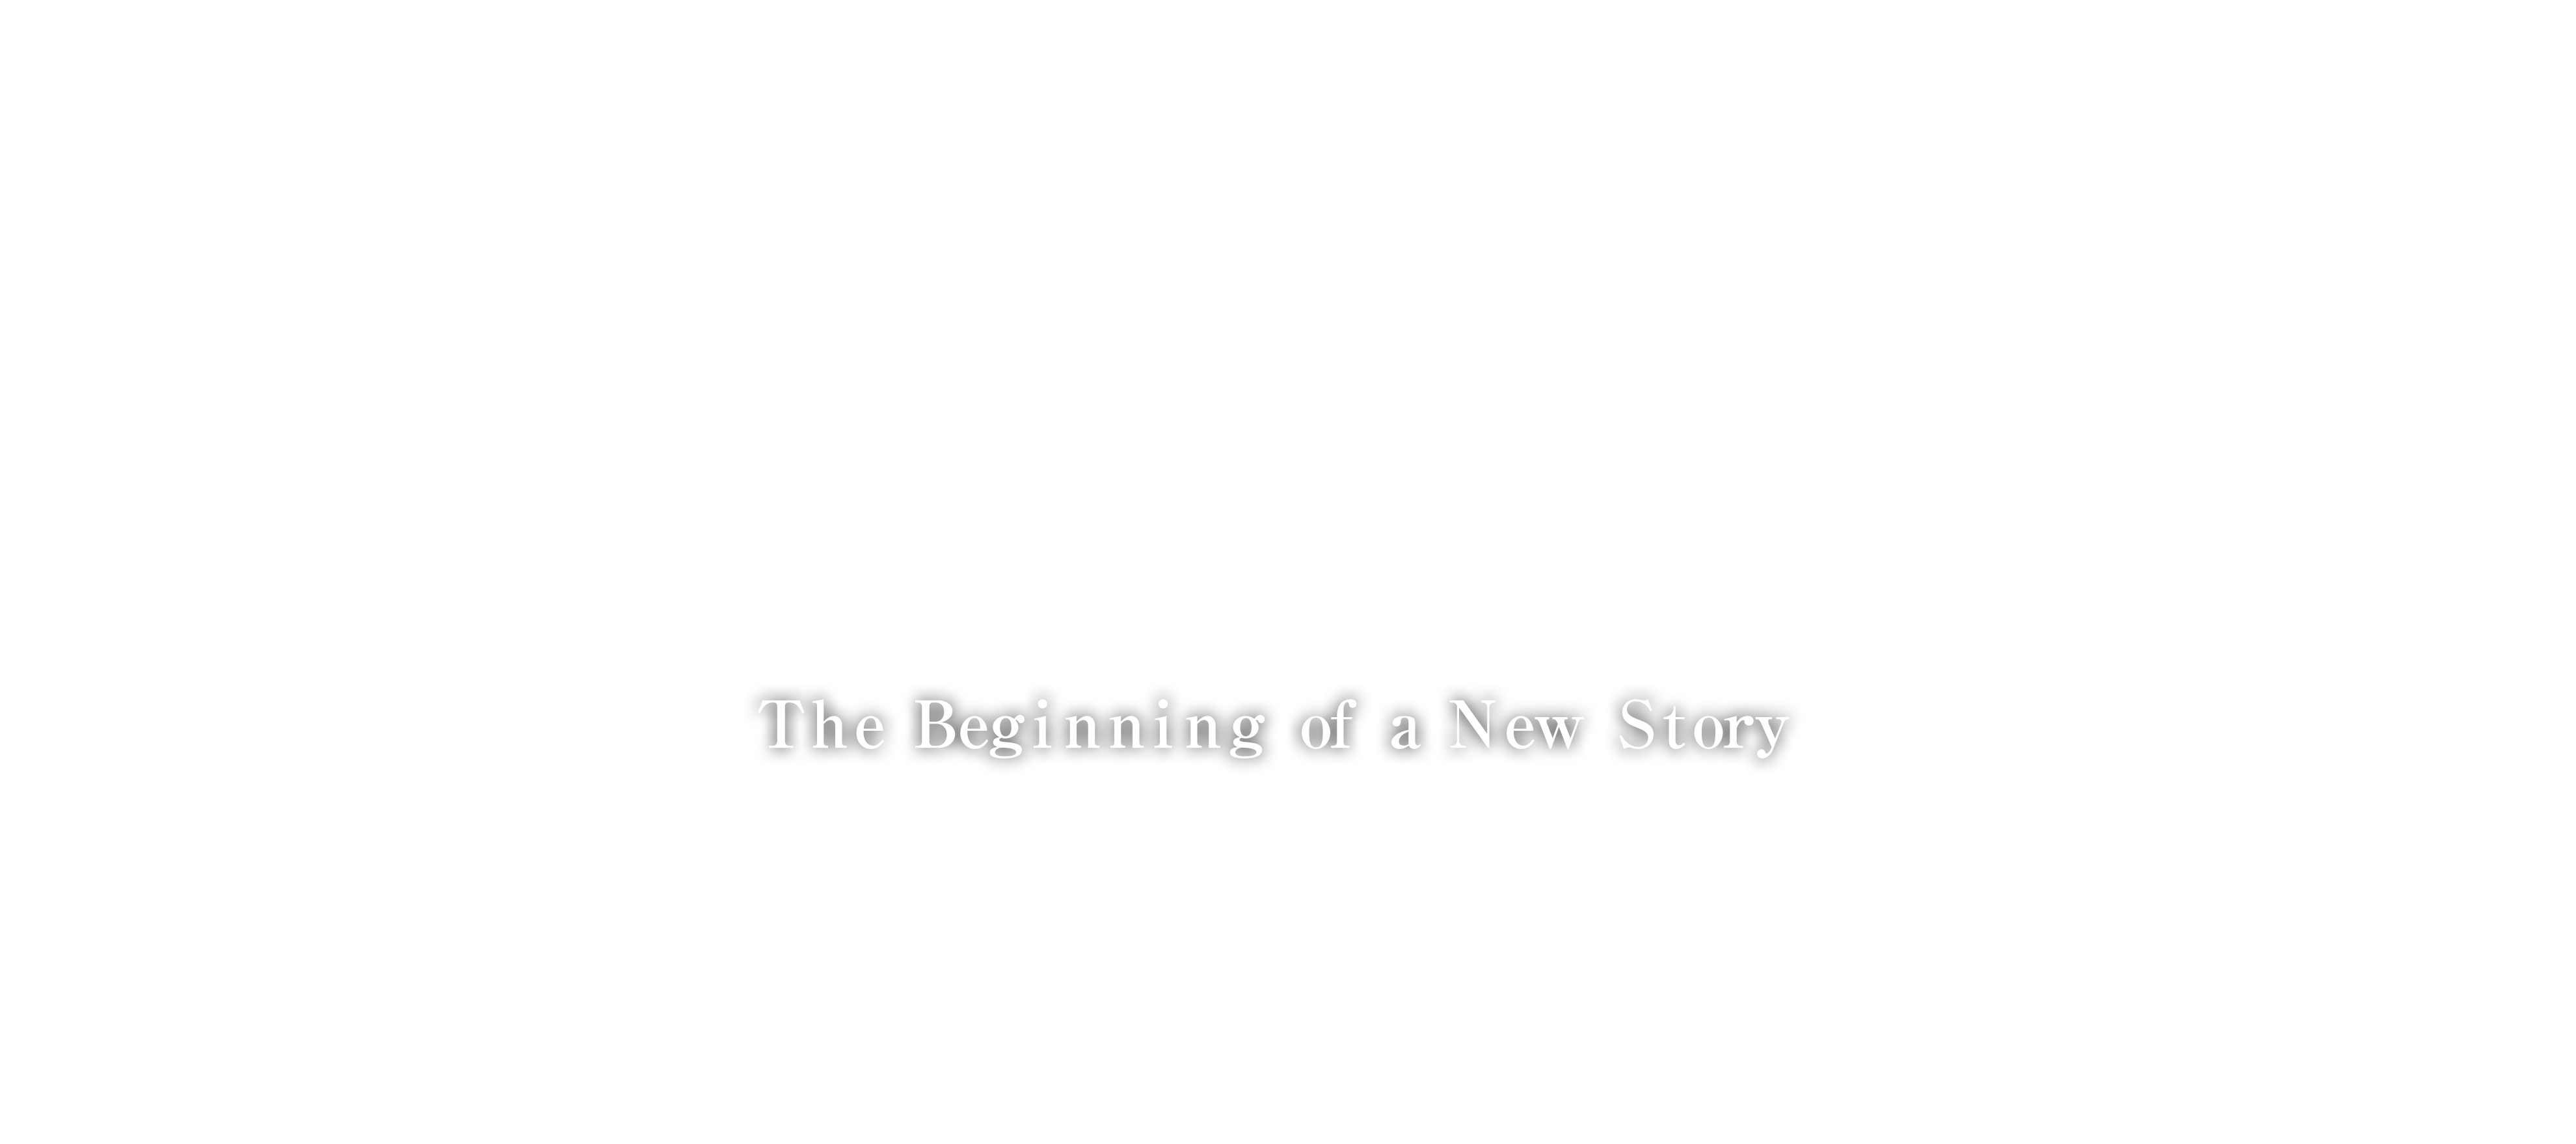 The Beginning of a New Story